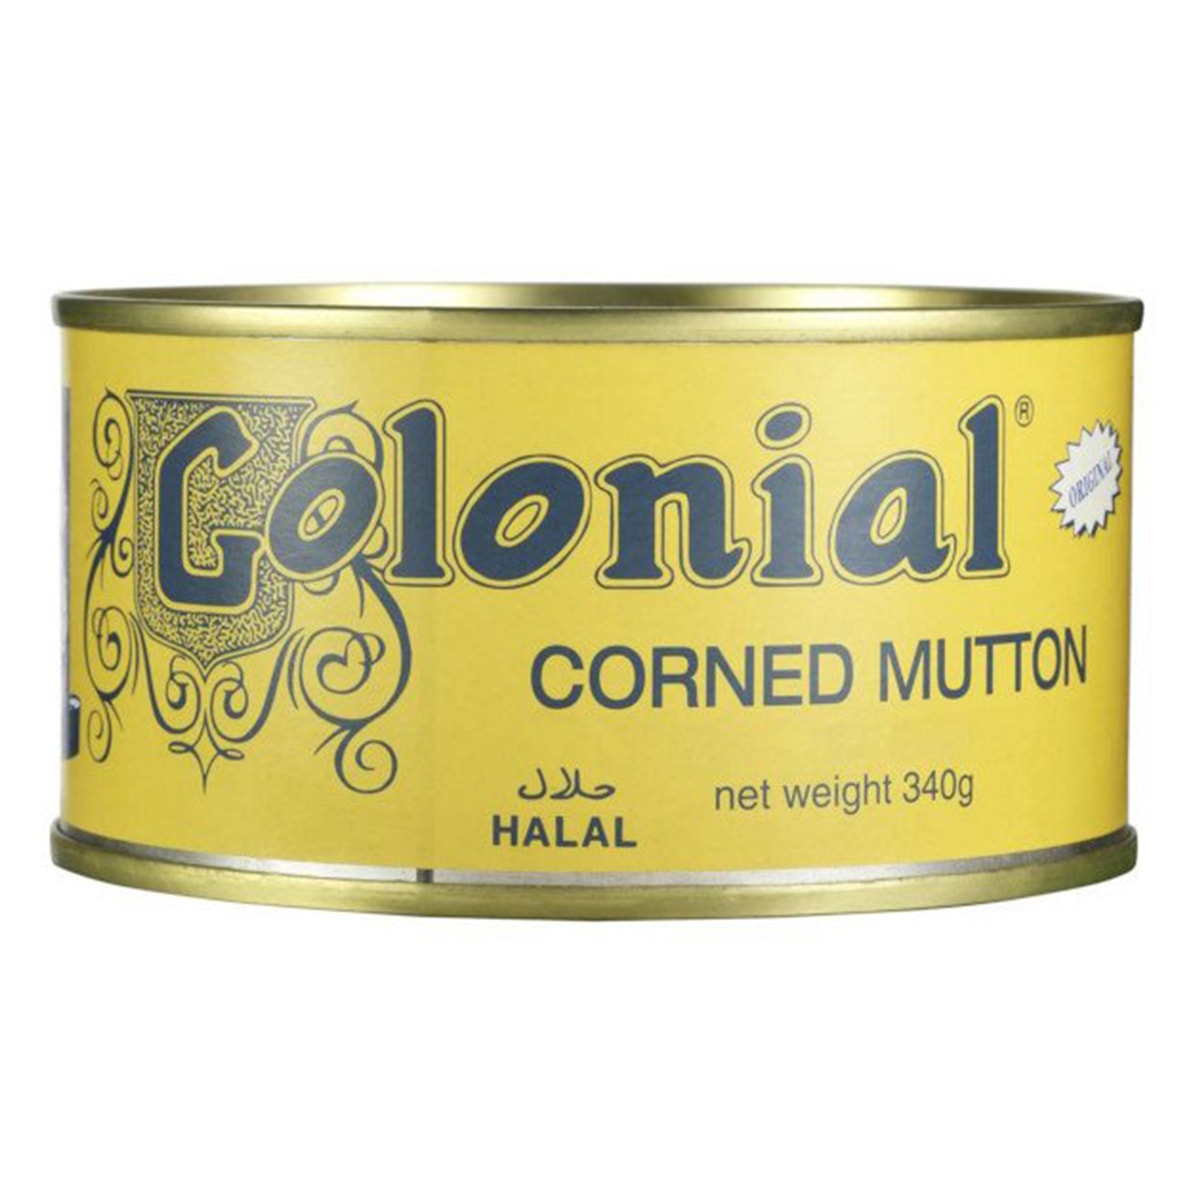 Buy Colonial Corned Mutton Halal - 340 gm